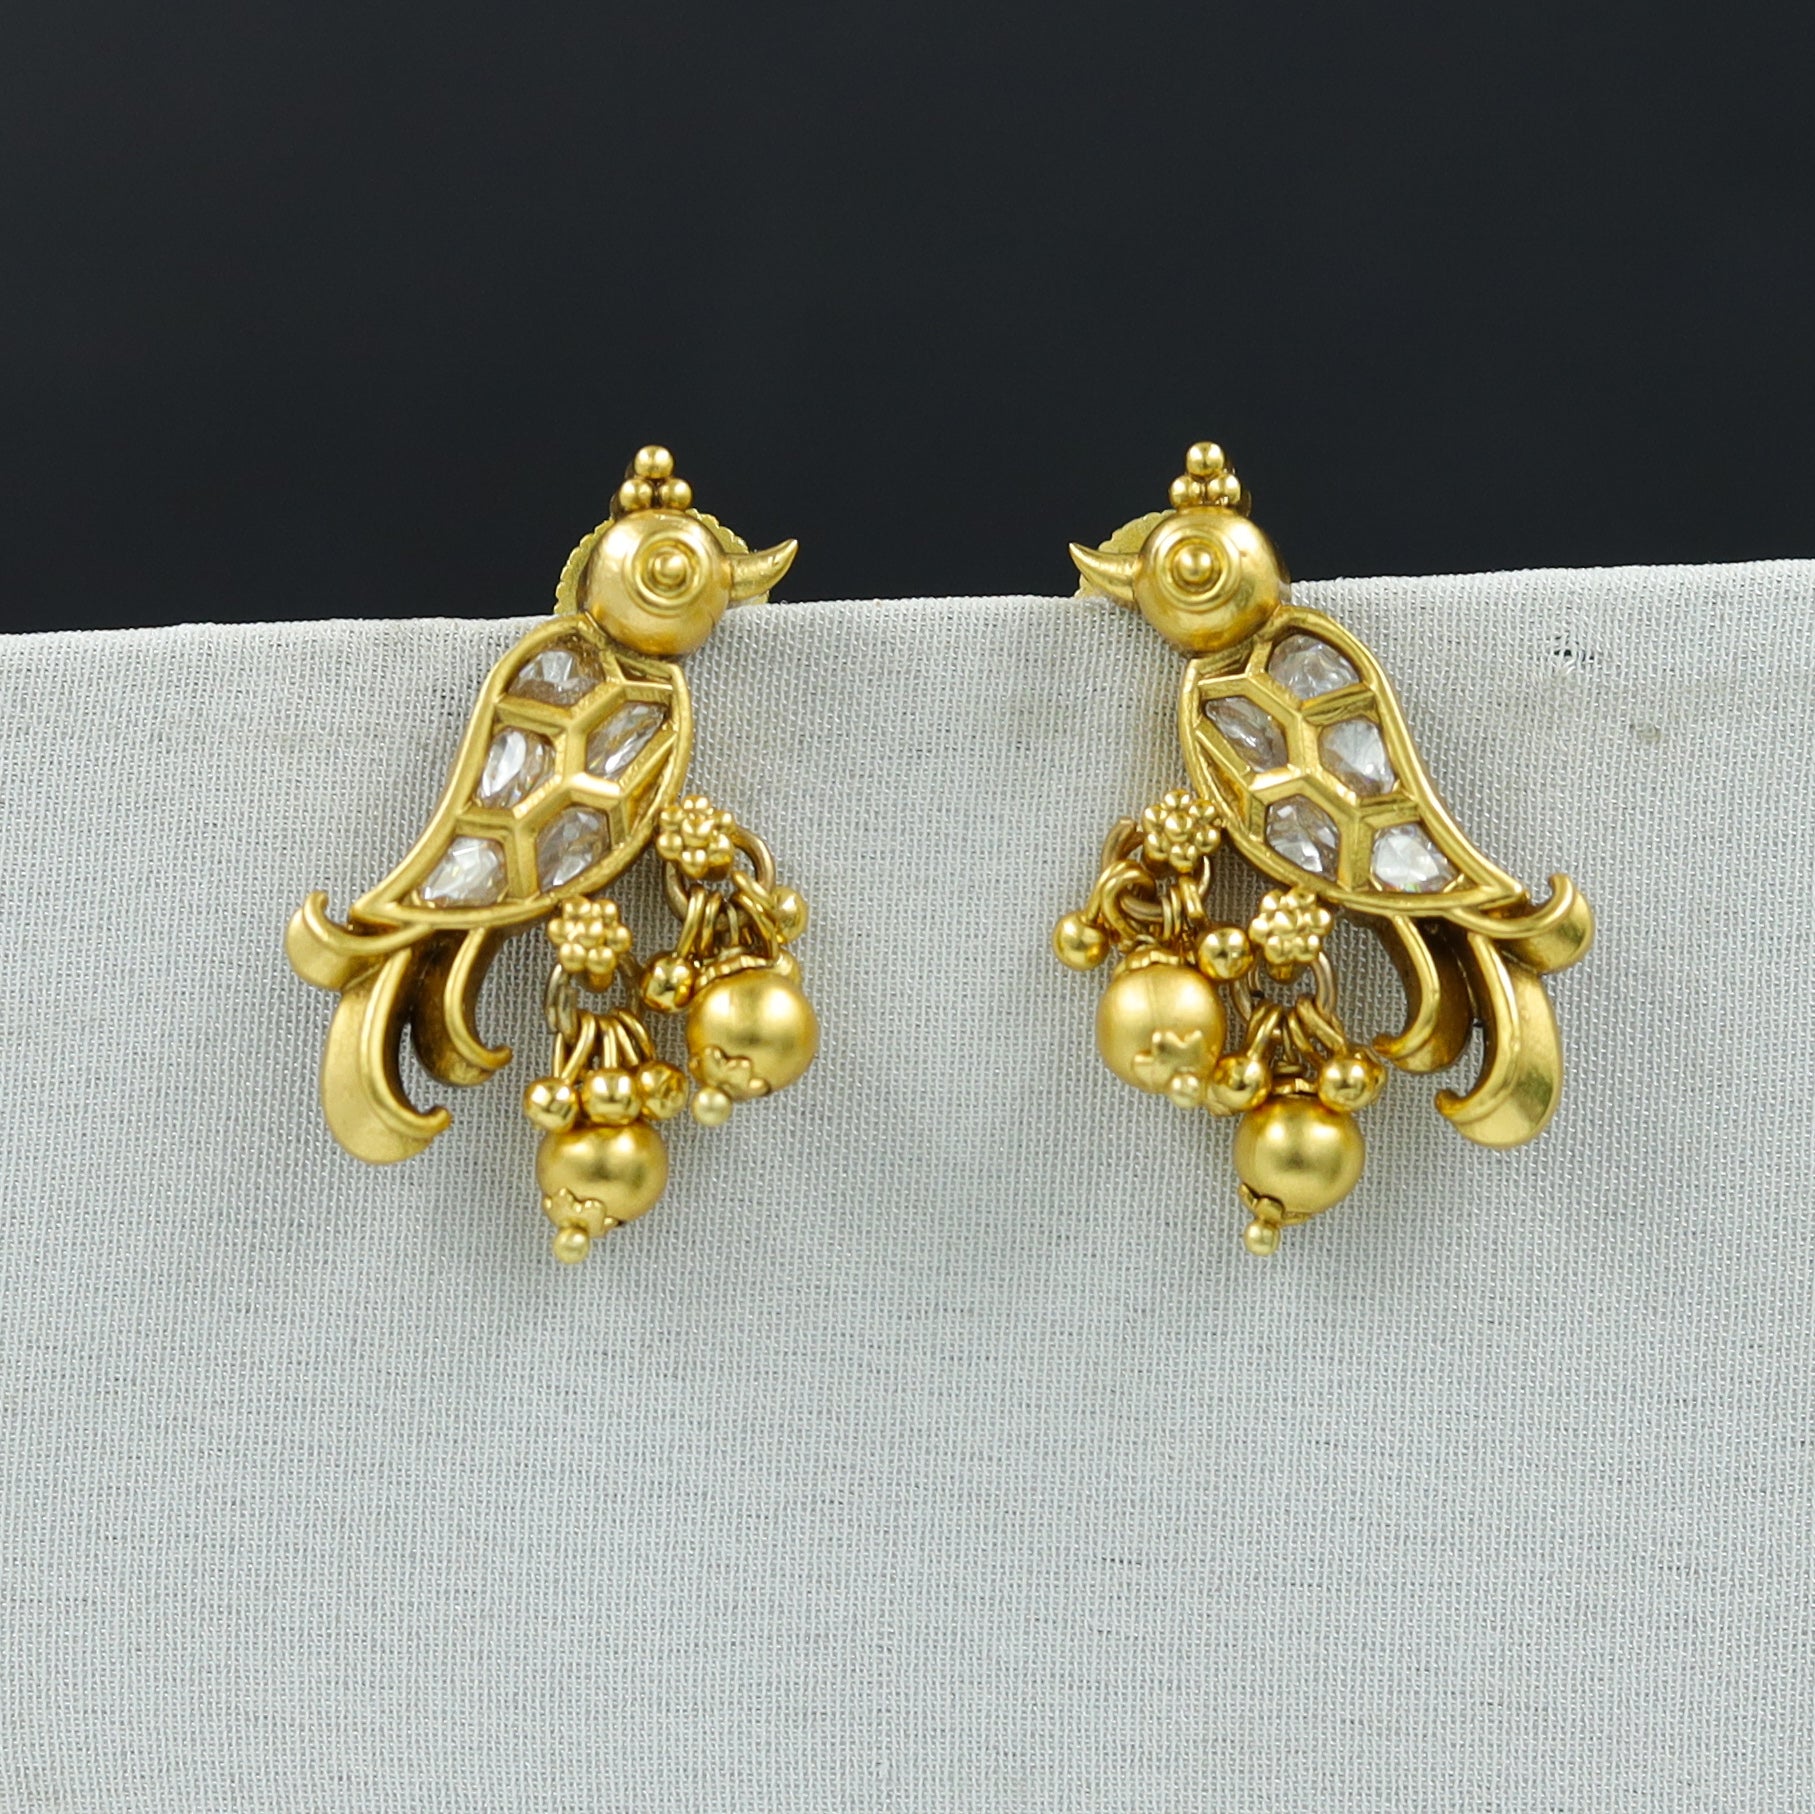 Tops/Studs Antique Earring 10283-28